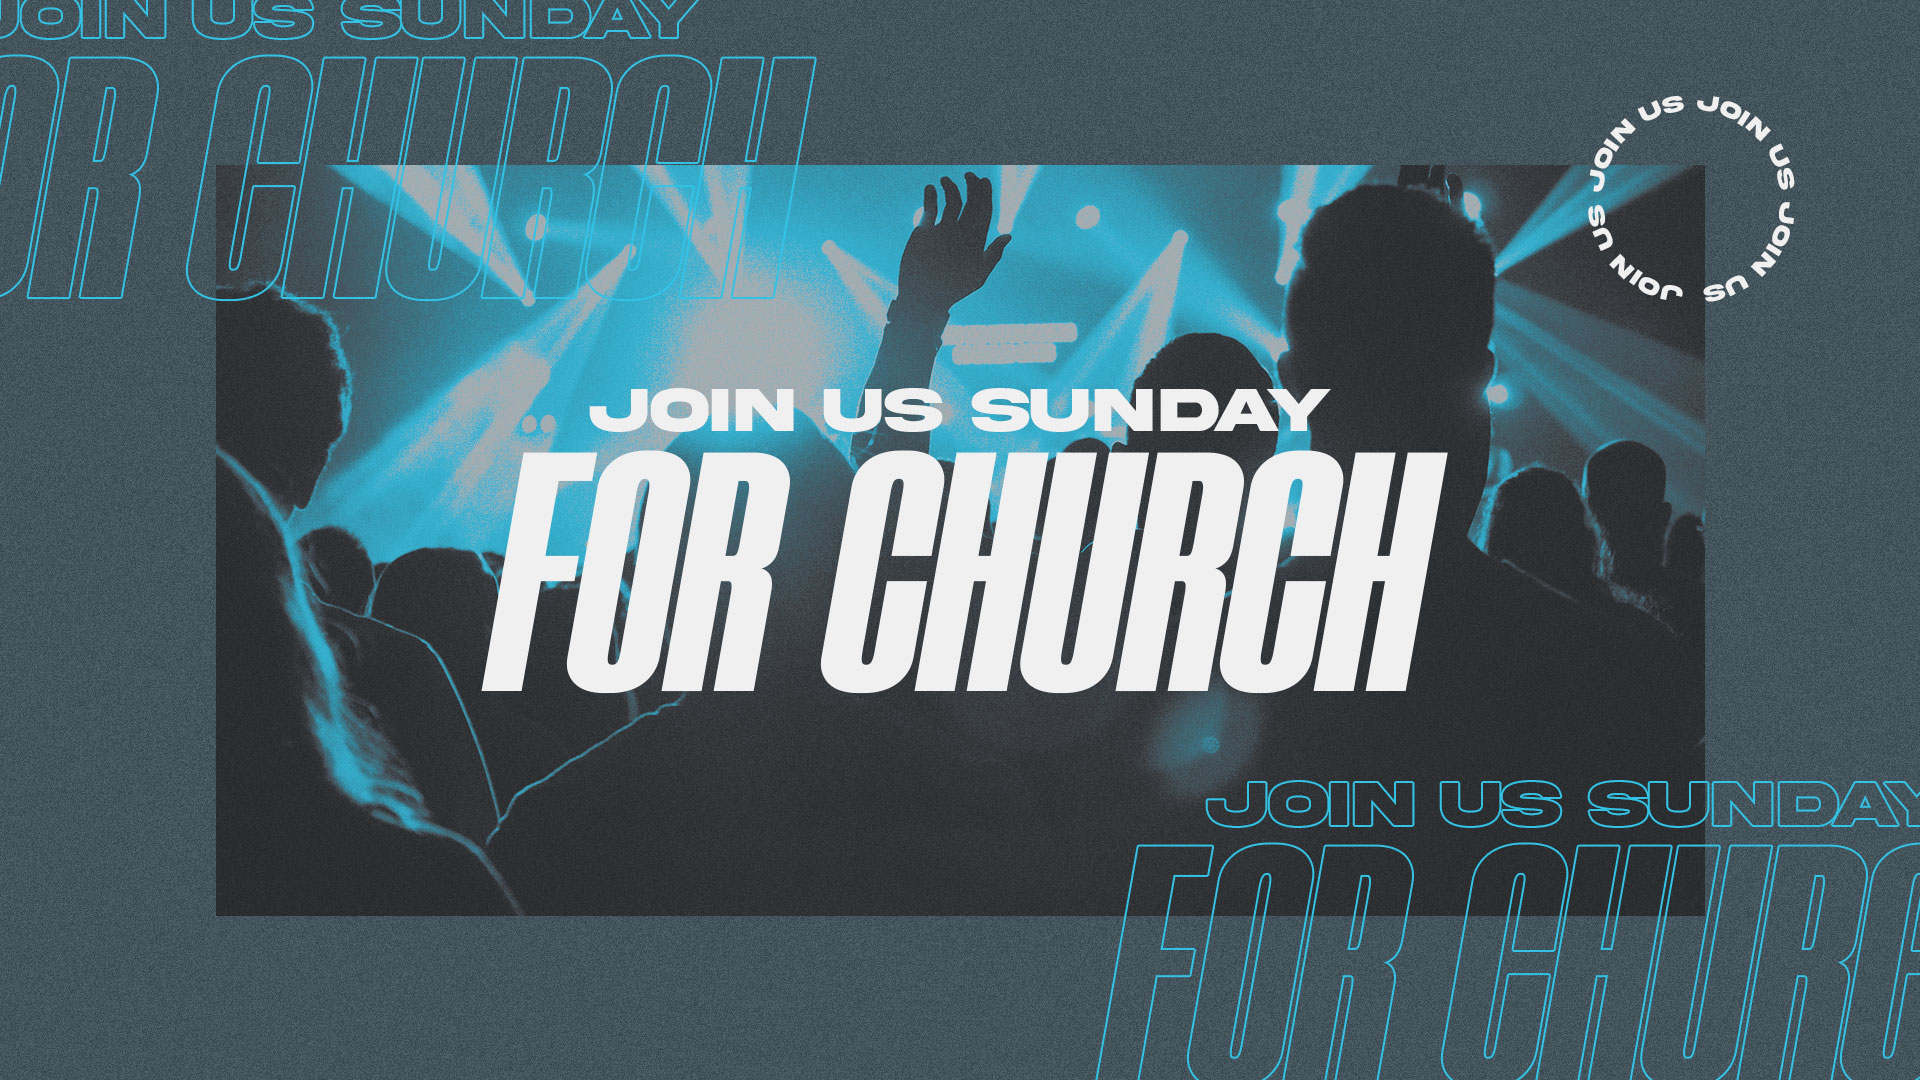   Join us Sunday for church